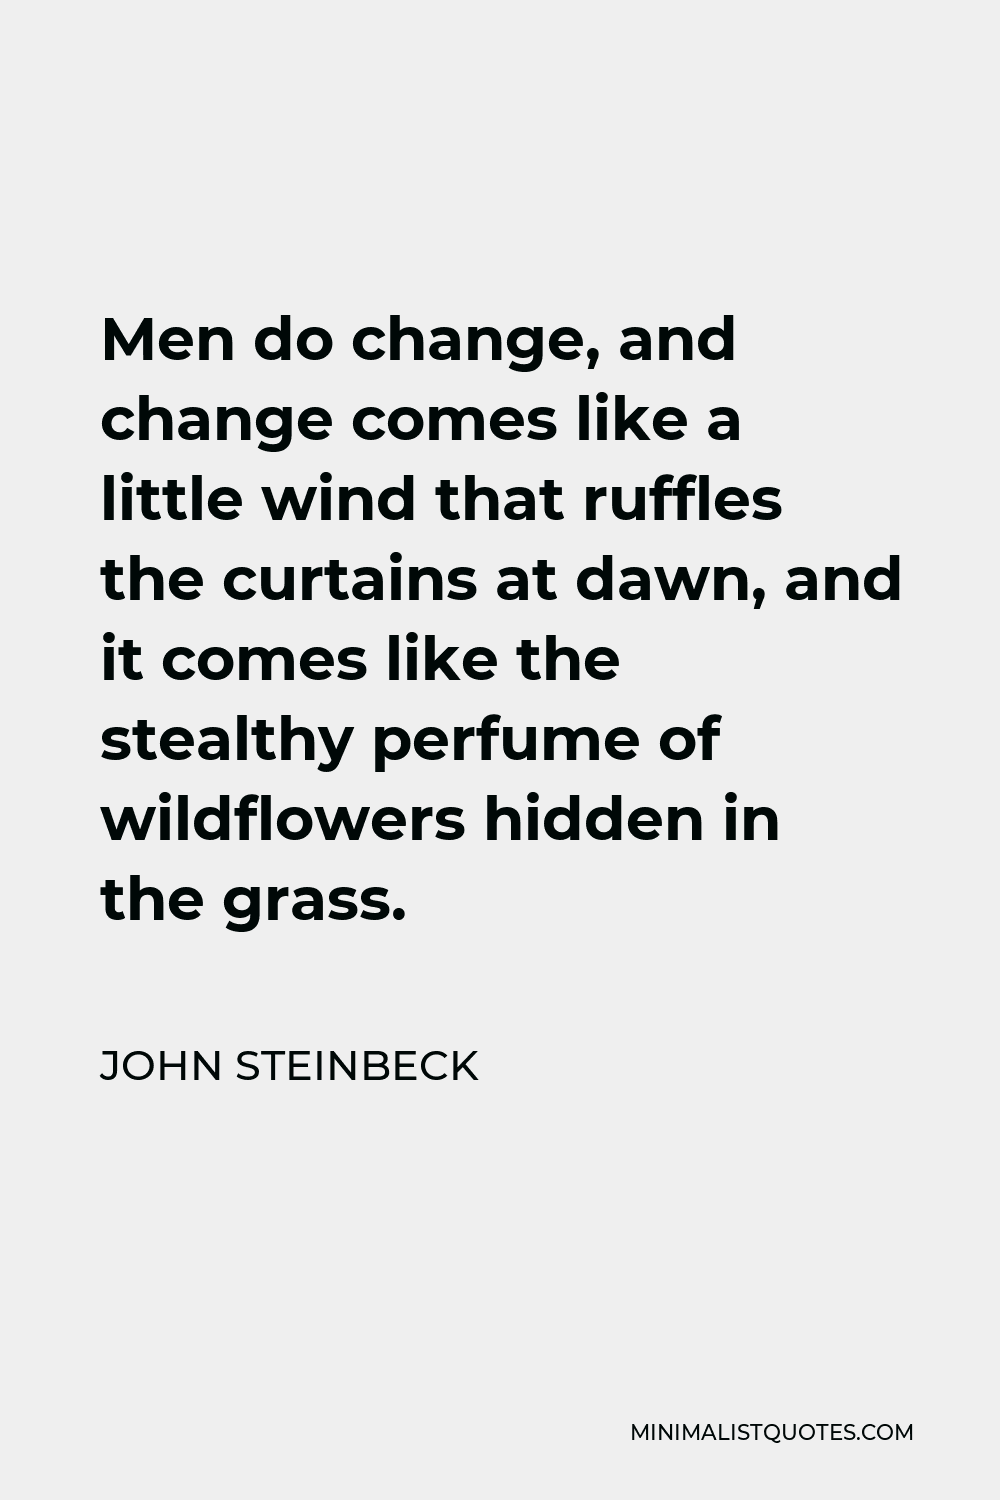 John Steinbeck Quote - Men do change, and change comes like a little wind that ruffles the curtains at dawn, and it comes like the stealthy perfume of wildflowers hidden in the grass.